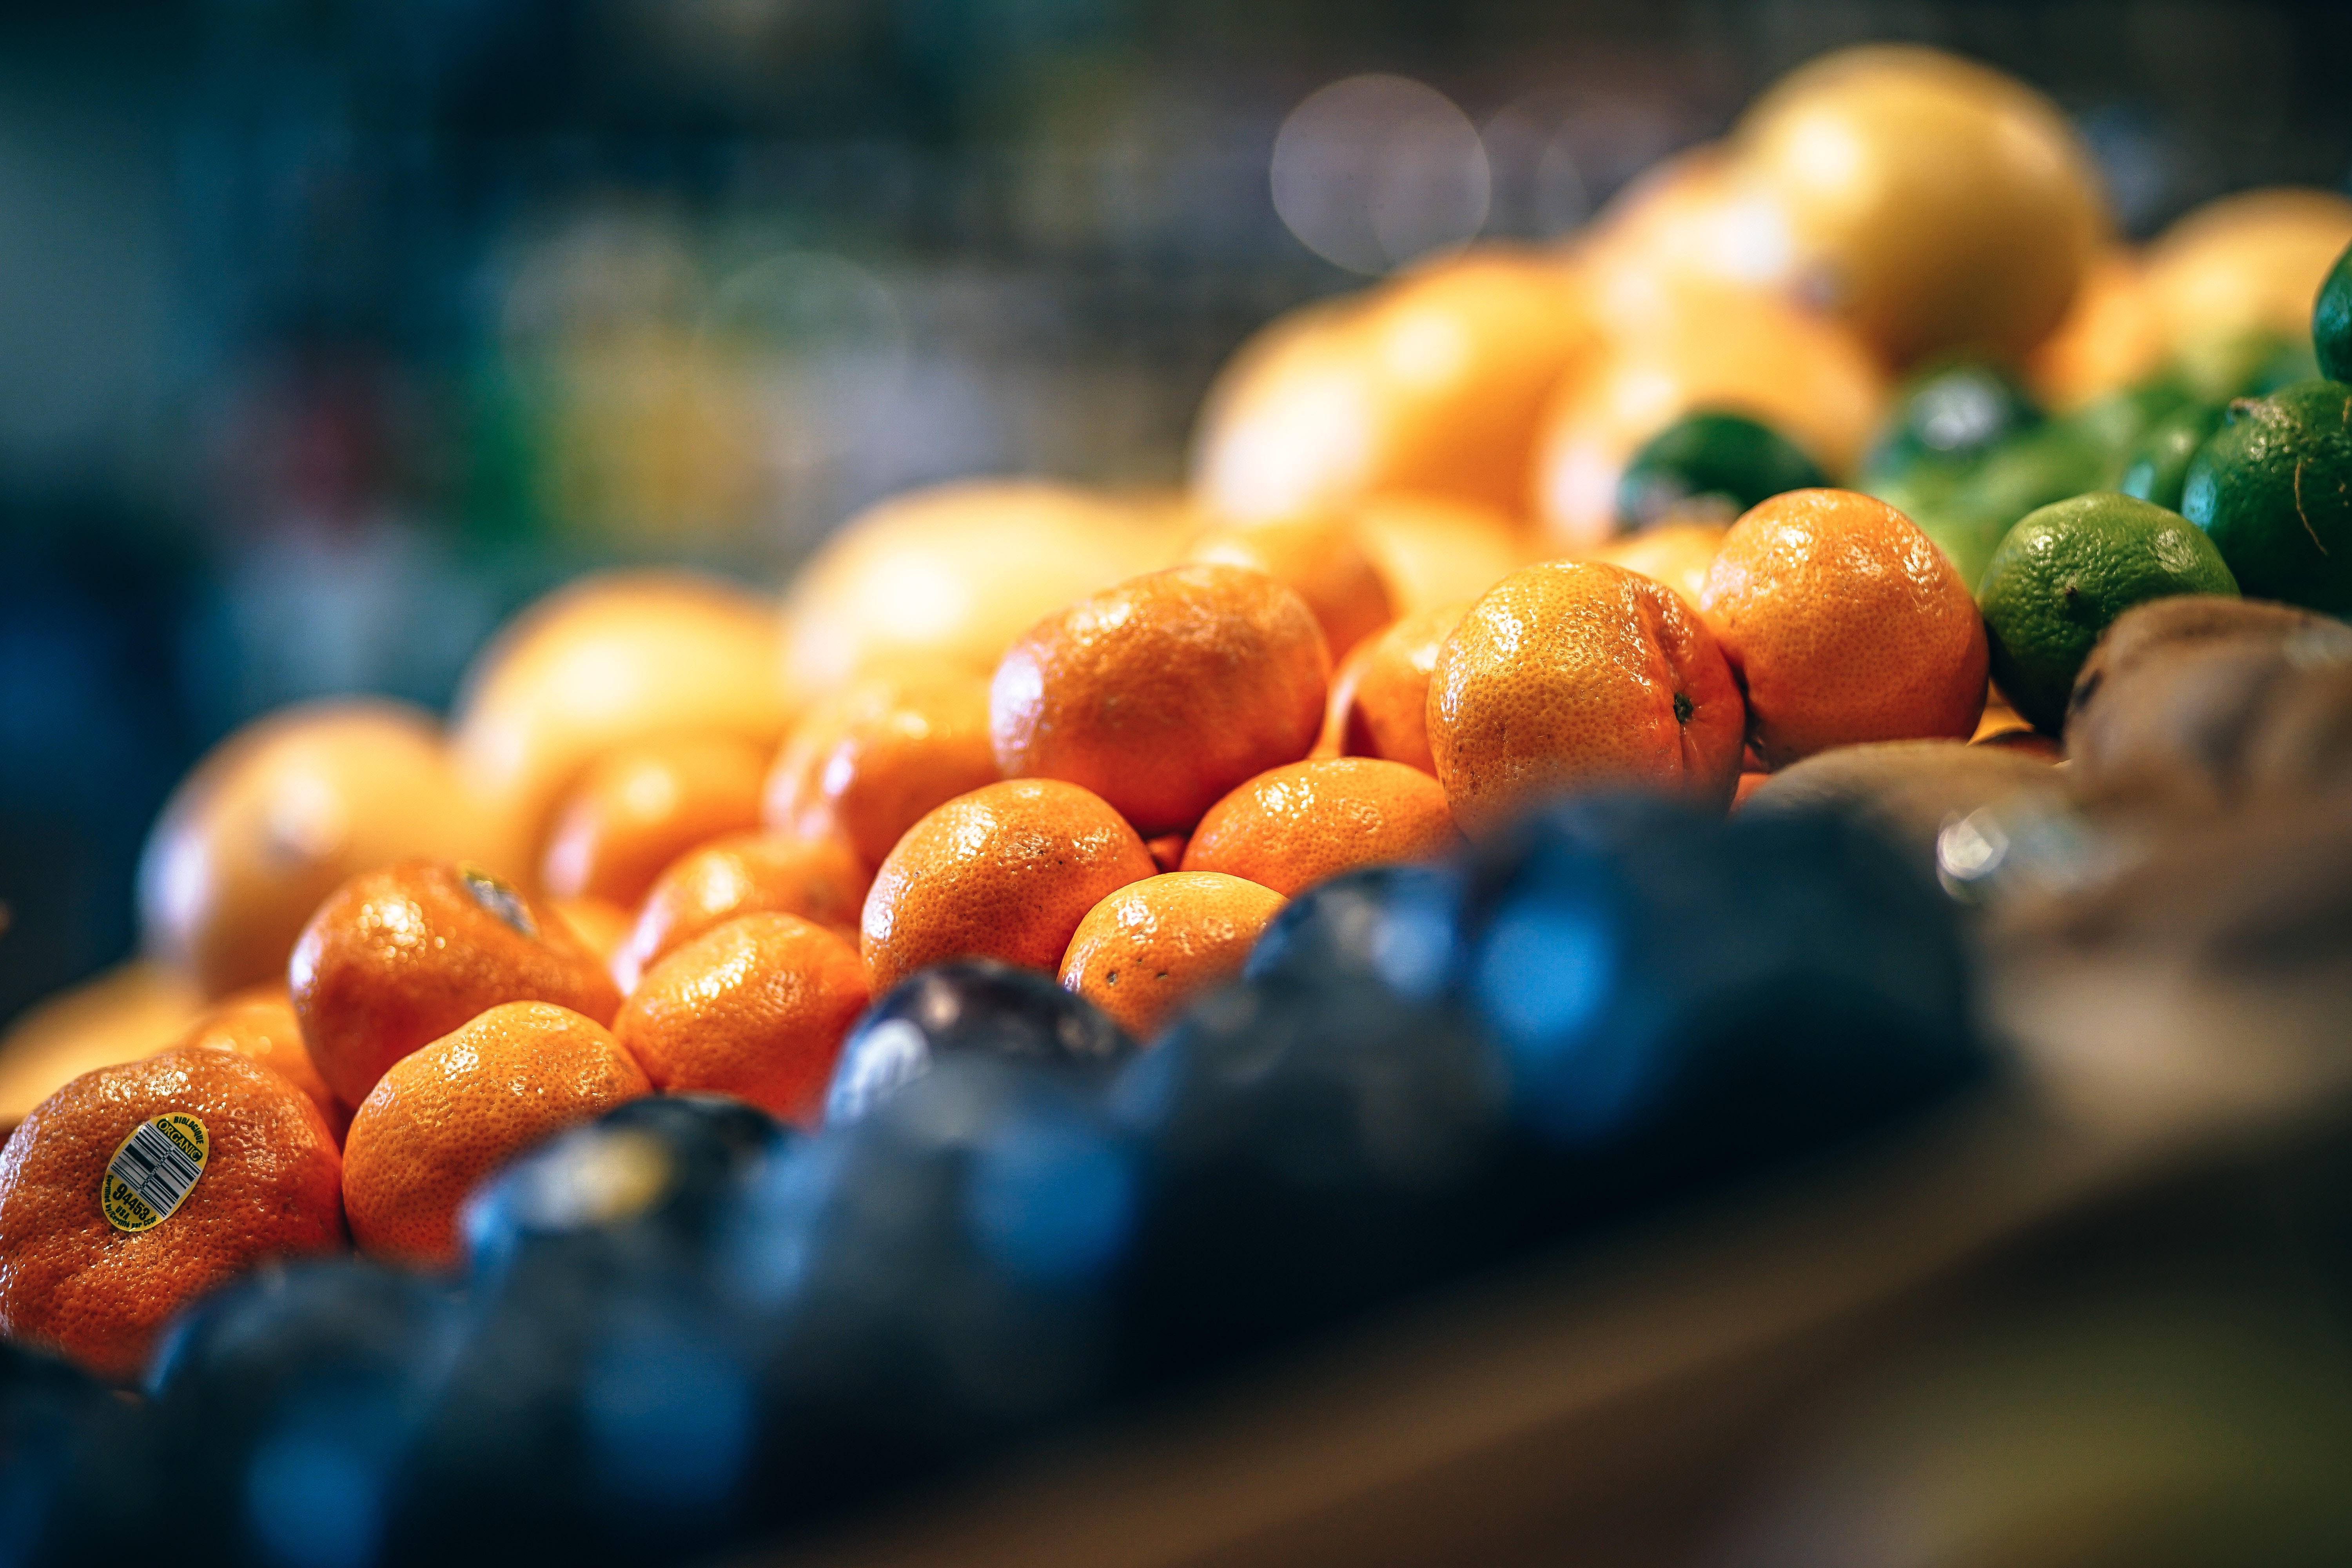 citrus-fruit-grocery featured image